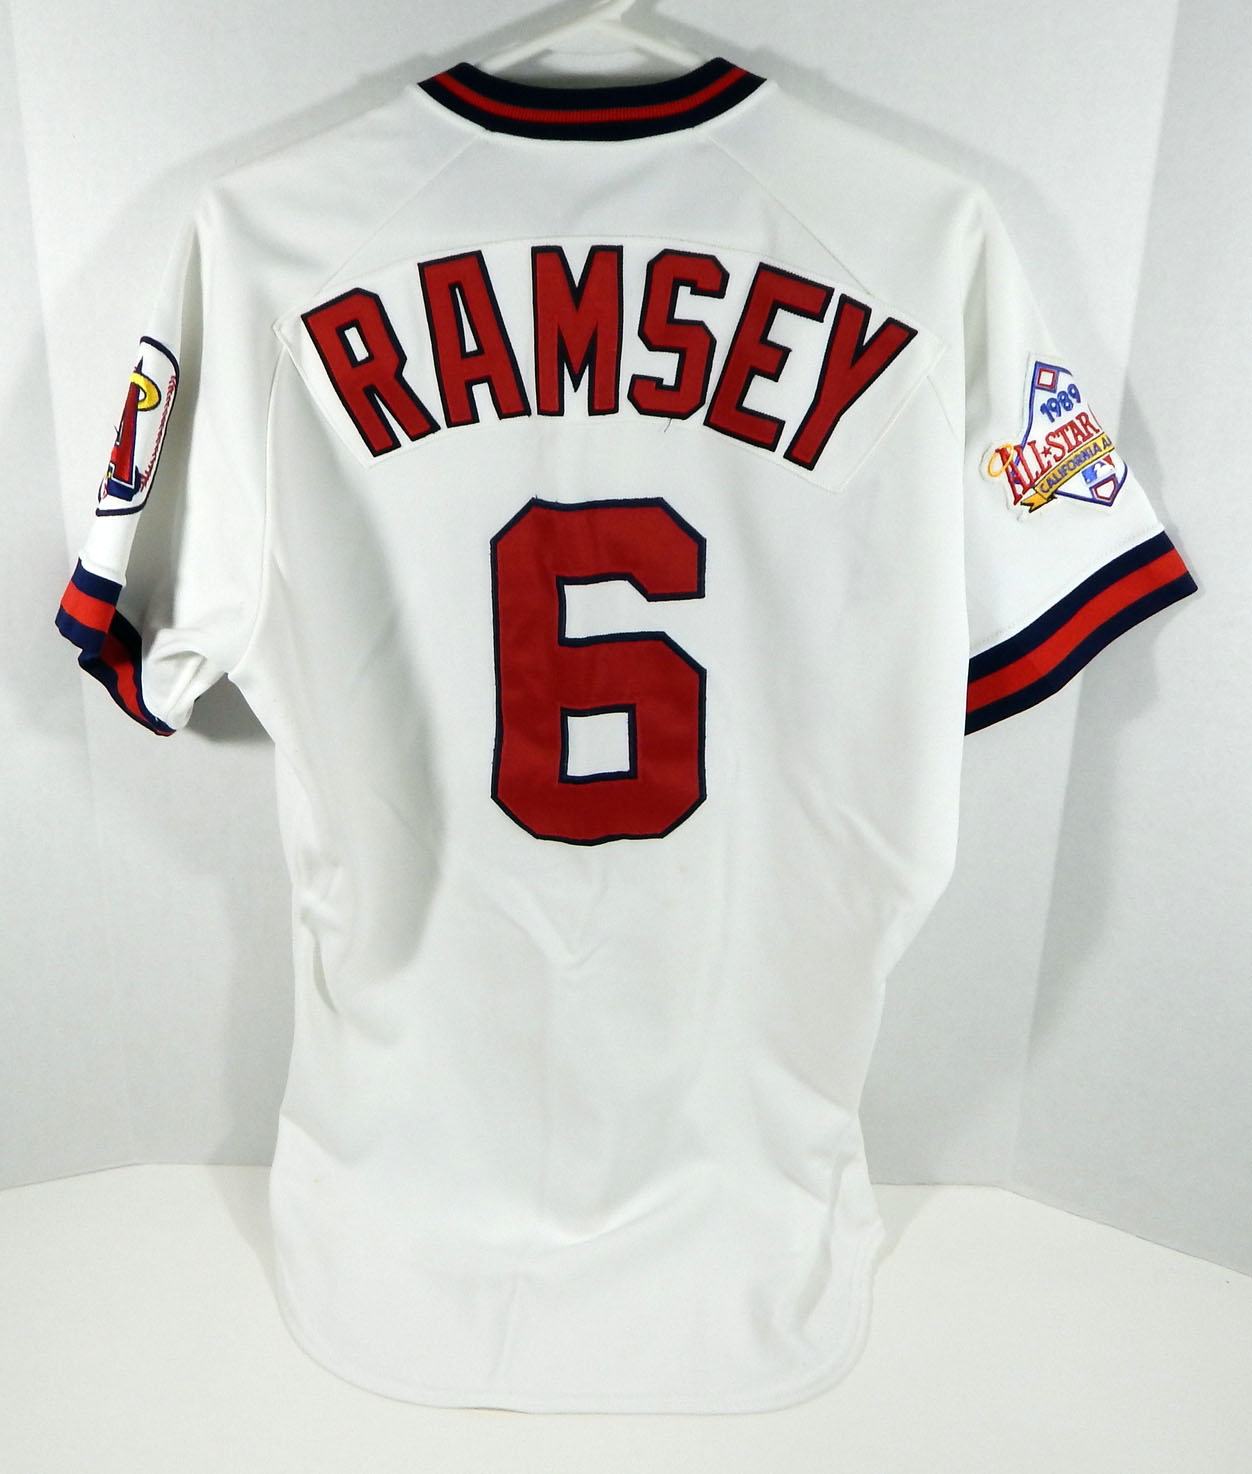 all star angels jersey